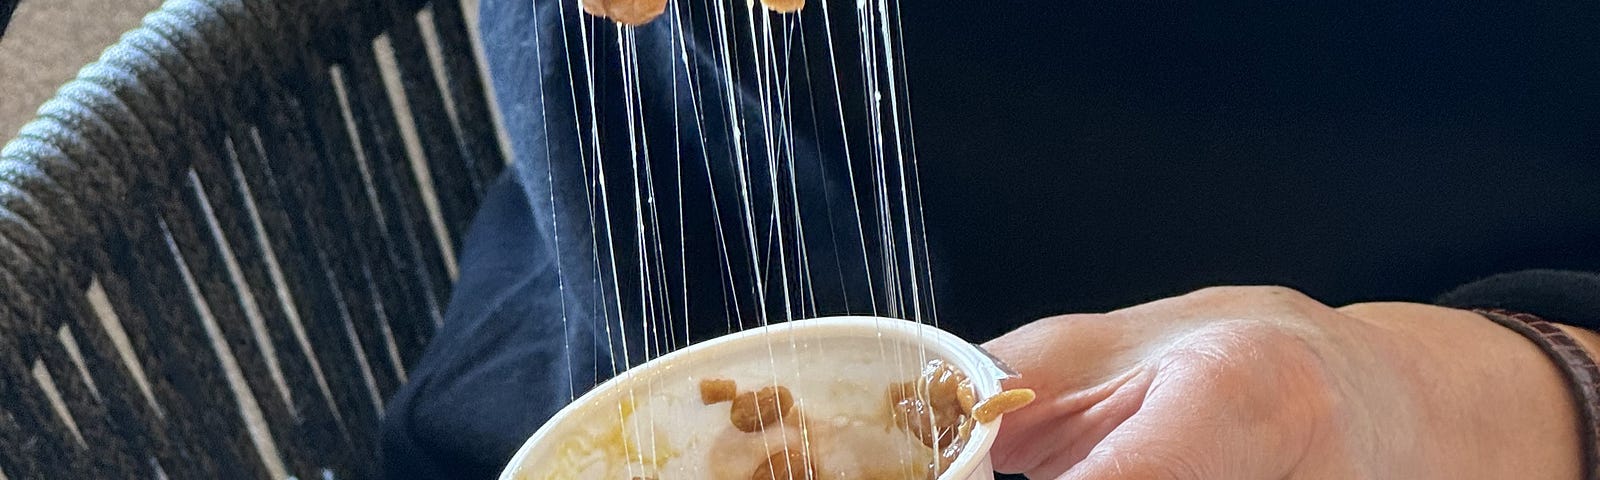 Natto being eaten from container using chopsticks